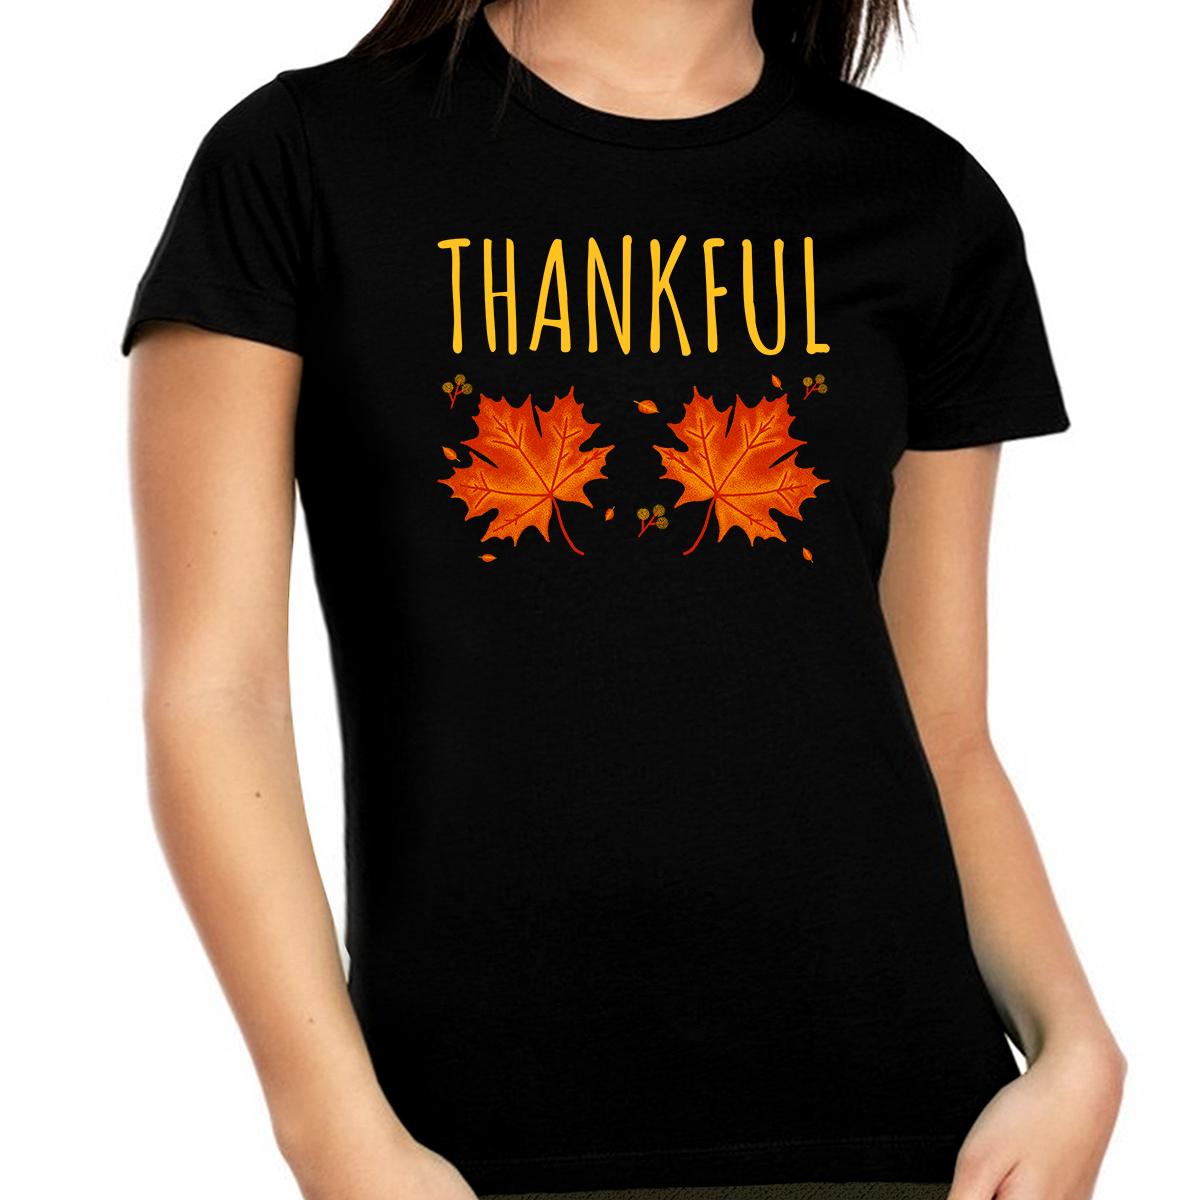 Plus Size Fall Tops for Women Fall Clothes for Women Thanksgiving Shirt Plus Size Thankful Shirts for Women